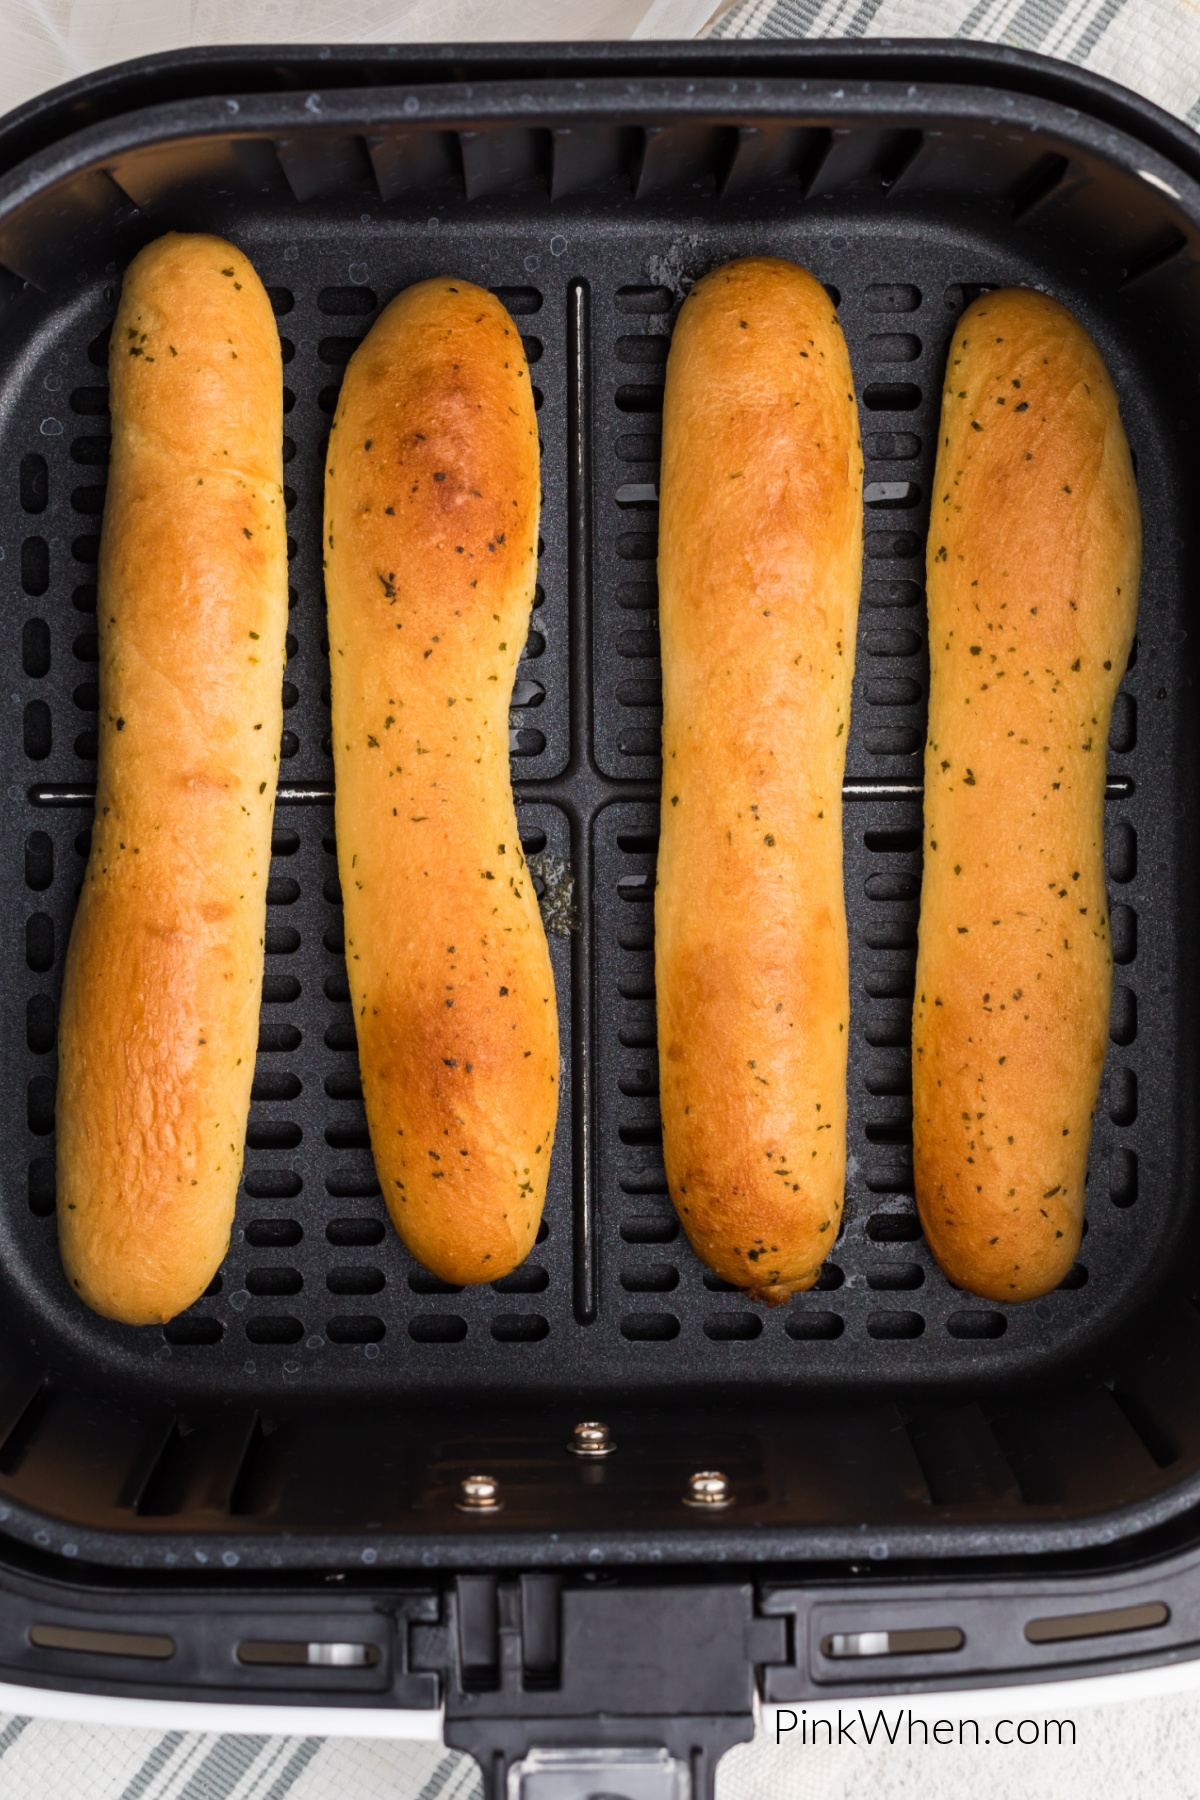 Air fried breadsticks made from frozen, fully cooked and in the basket of the air fryer.